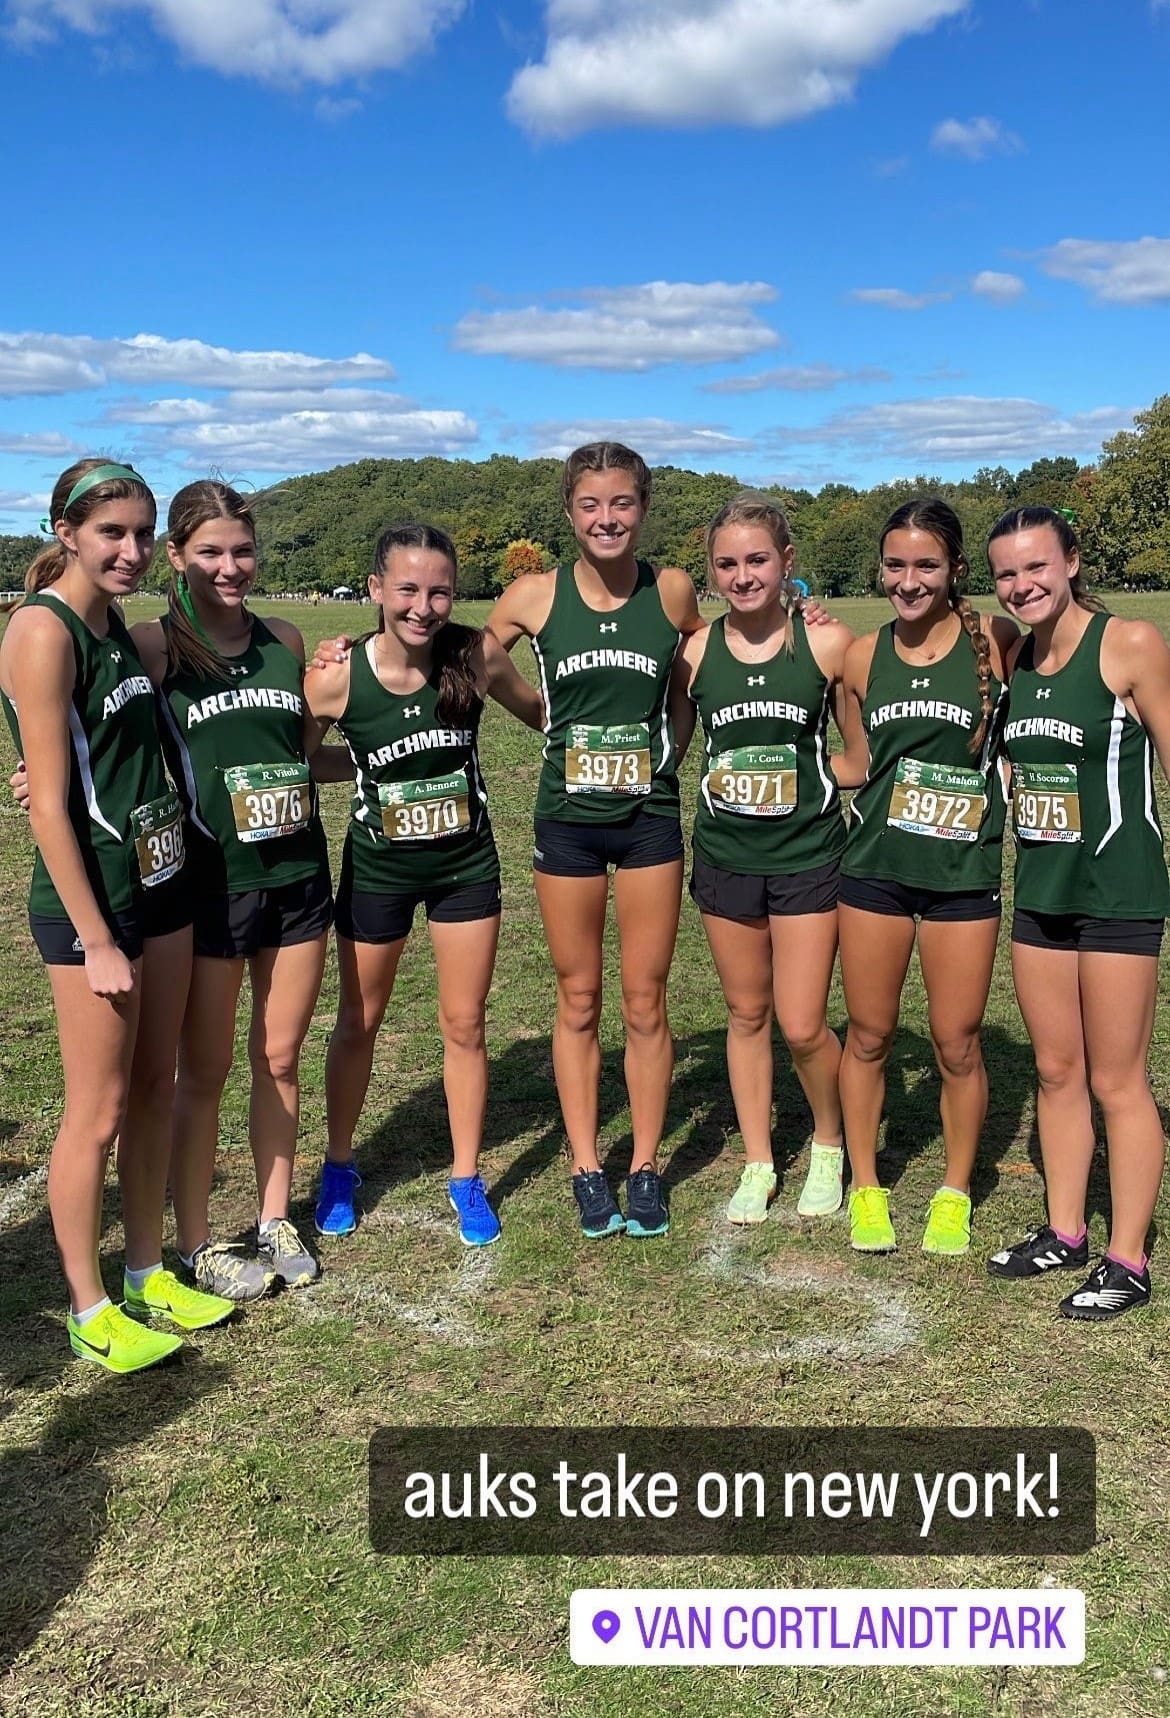 Featured image for “Manhattan Invitational featured several Delaware runners”